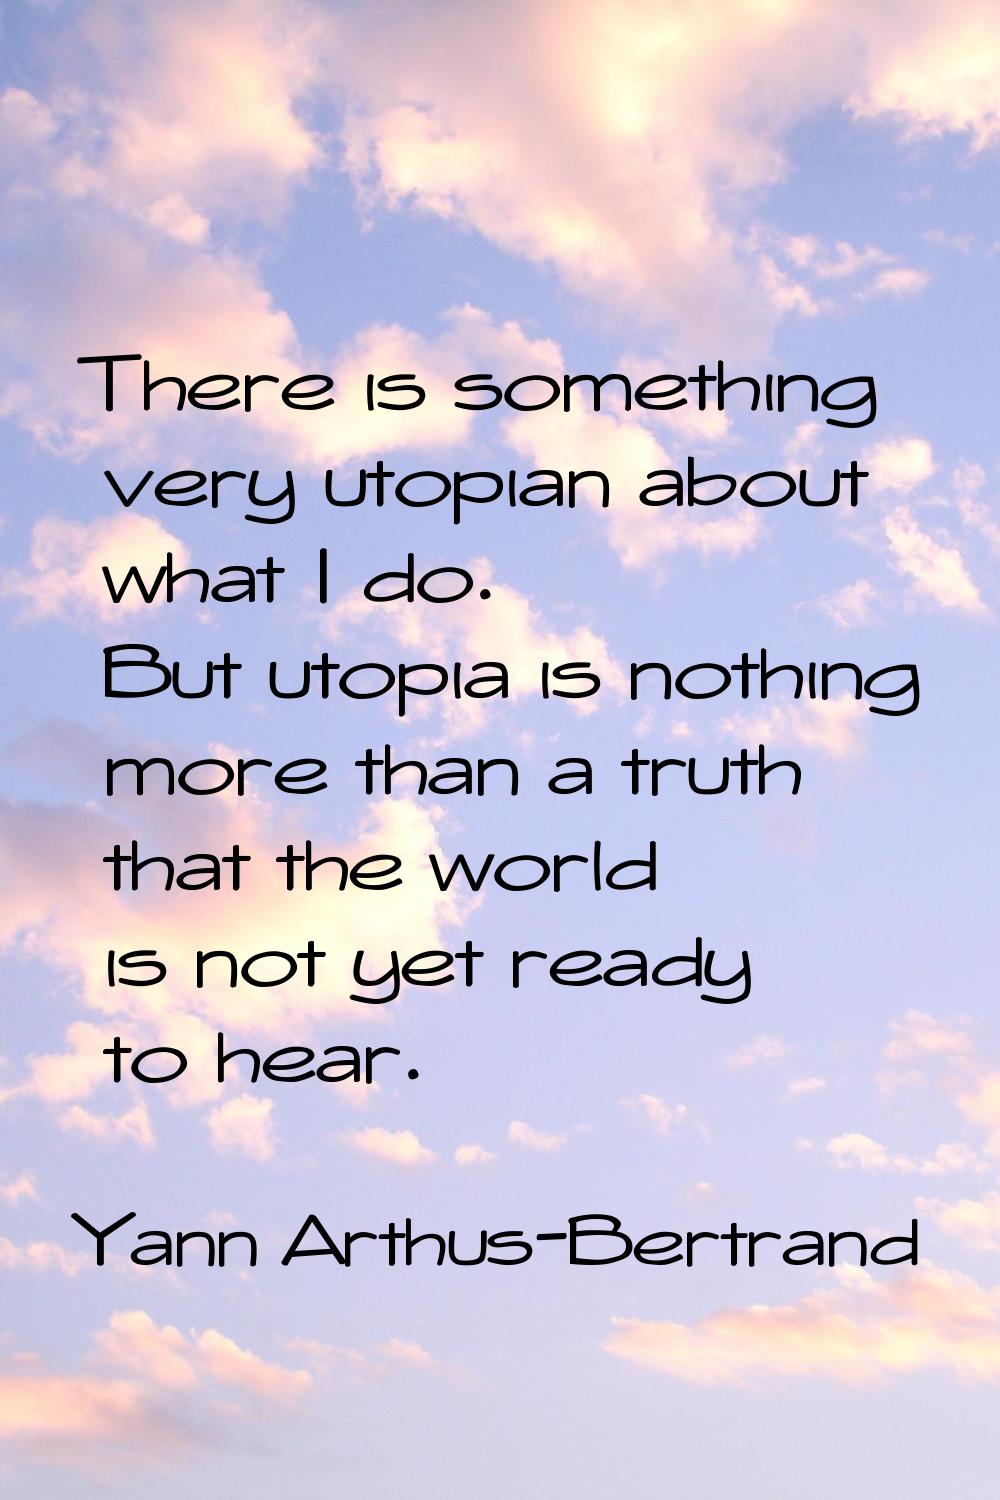 There is something very utopian about what I do. But utopia is nothing more than a truth that the w